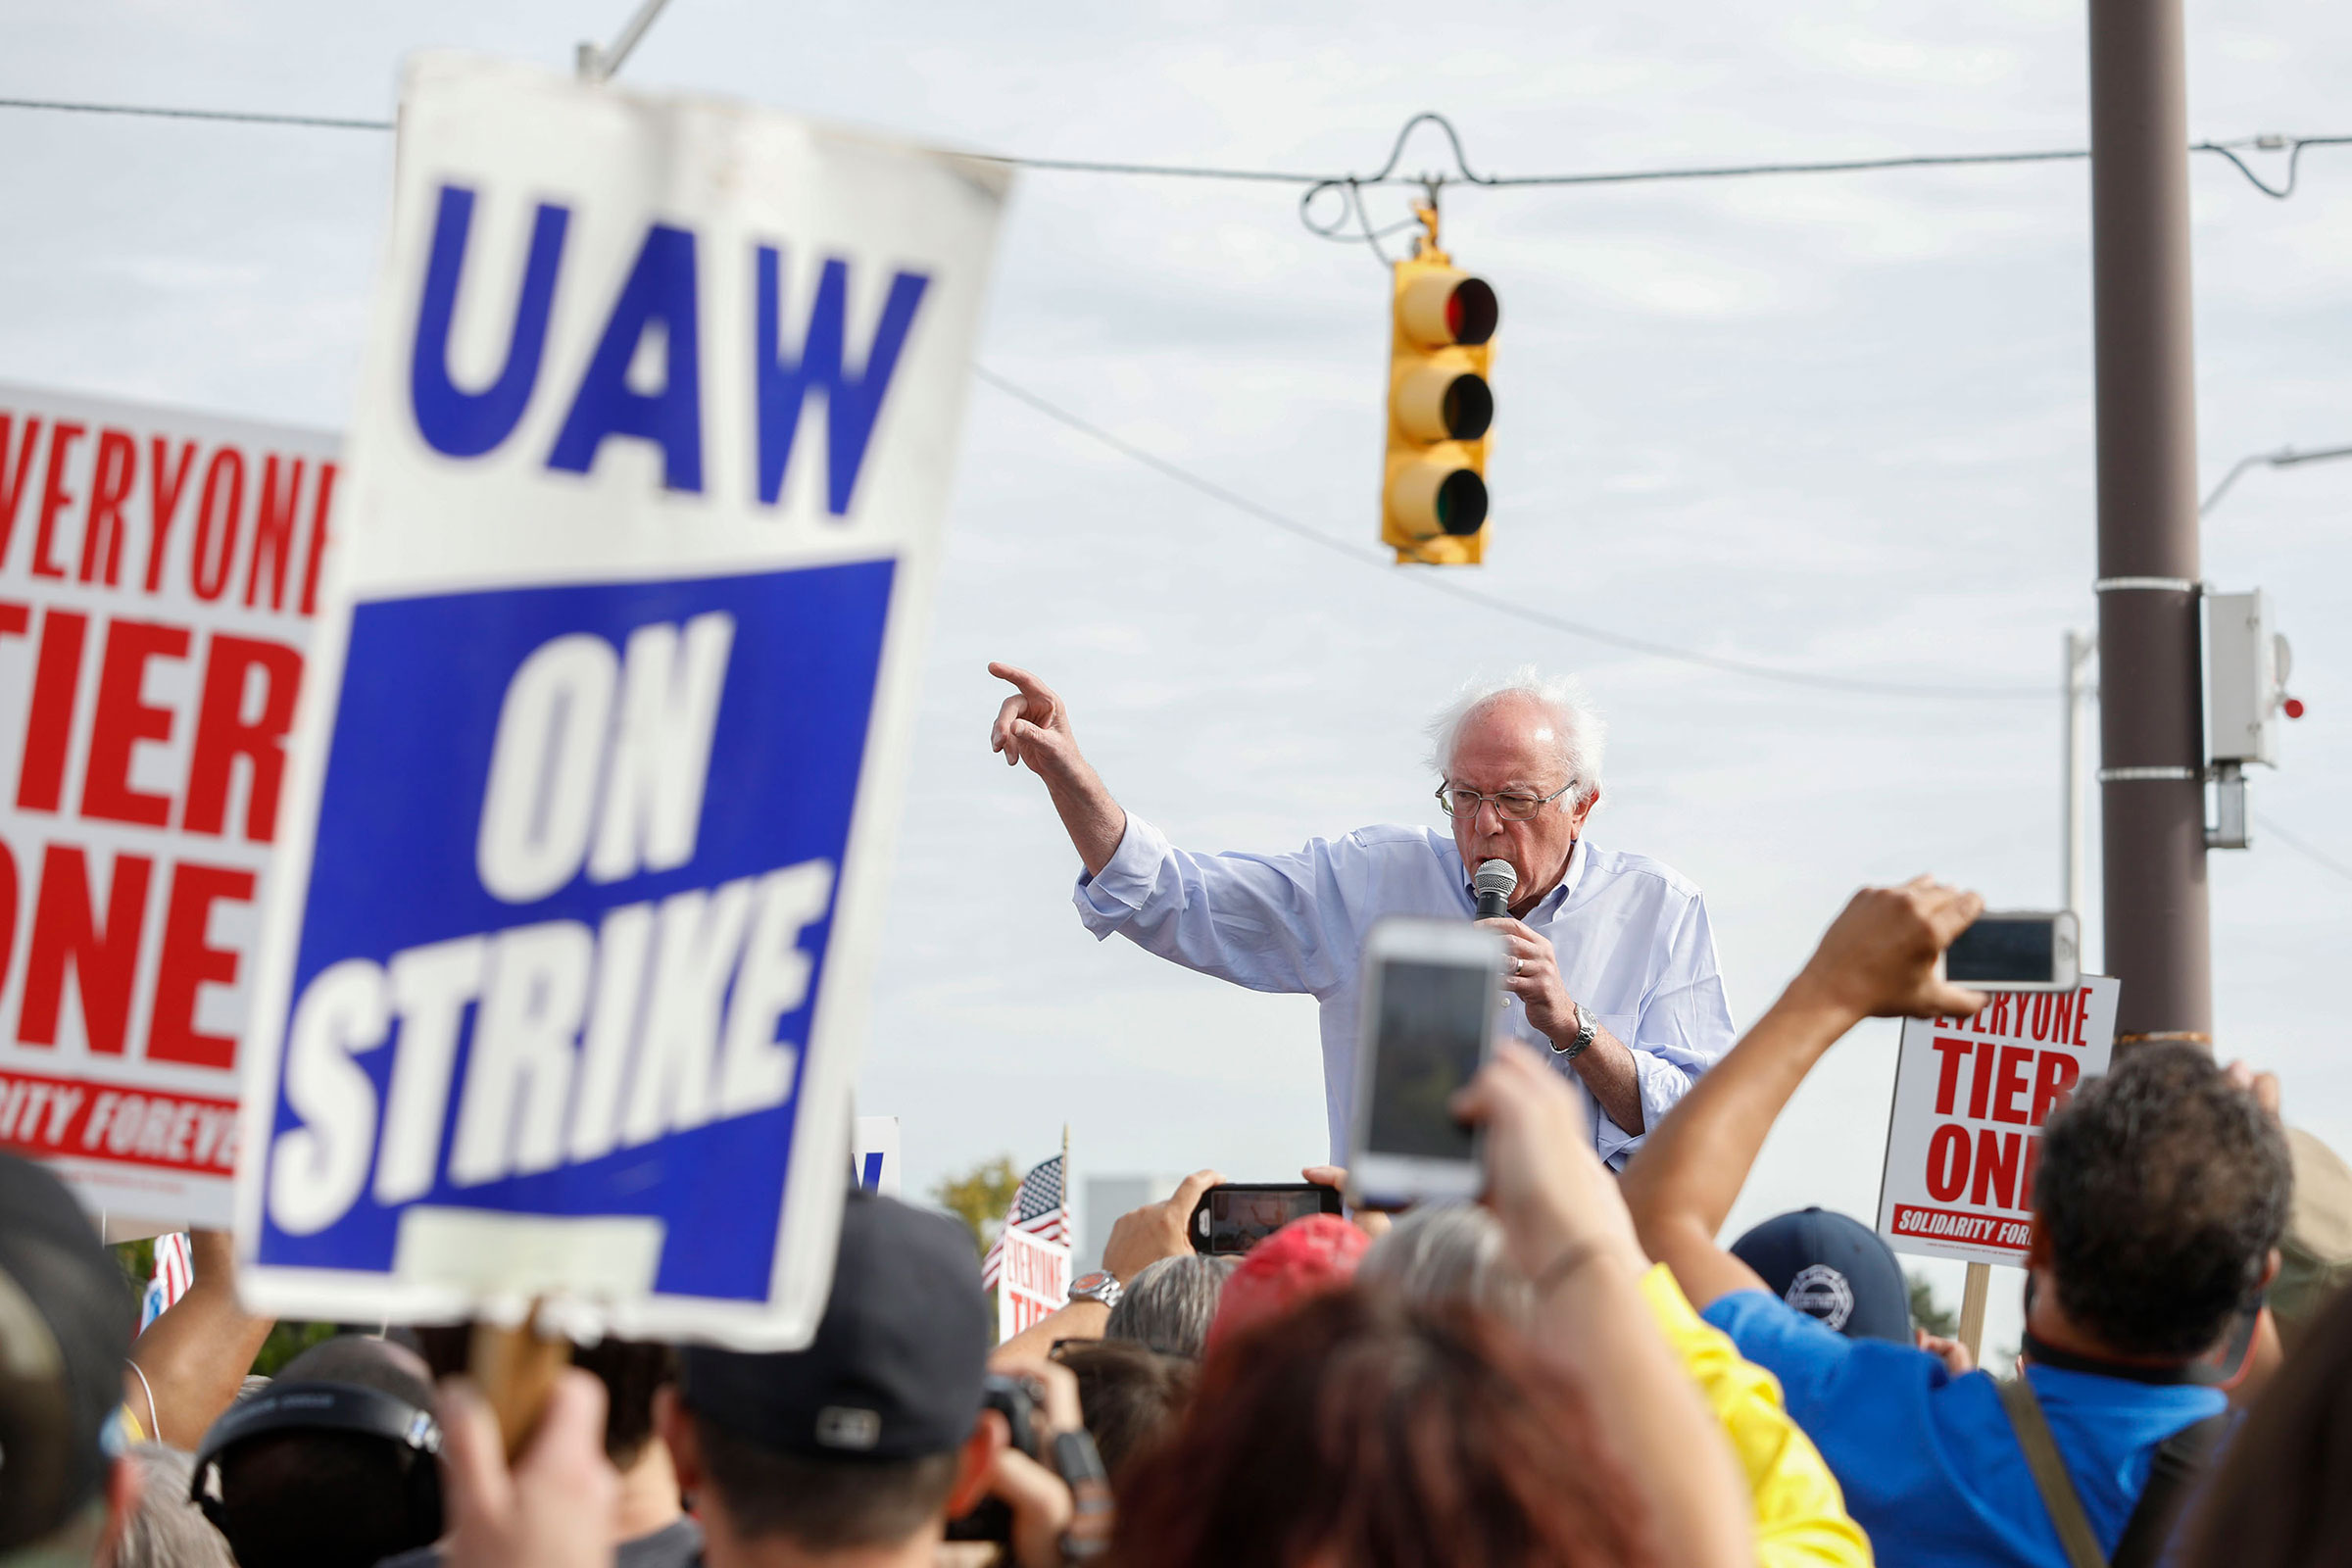 Bernie Sanders speaks passionately to rallying United Auto Worker members, one of whom are holding signs reading